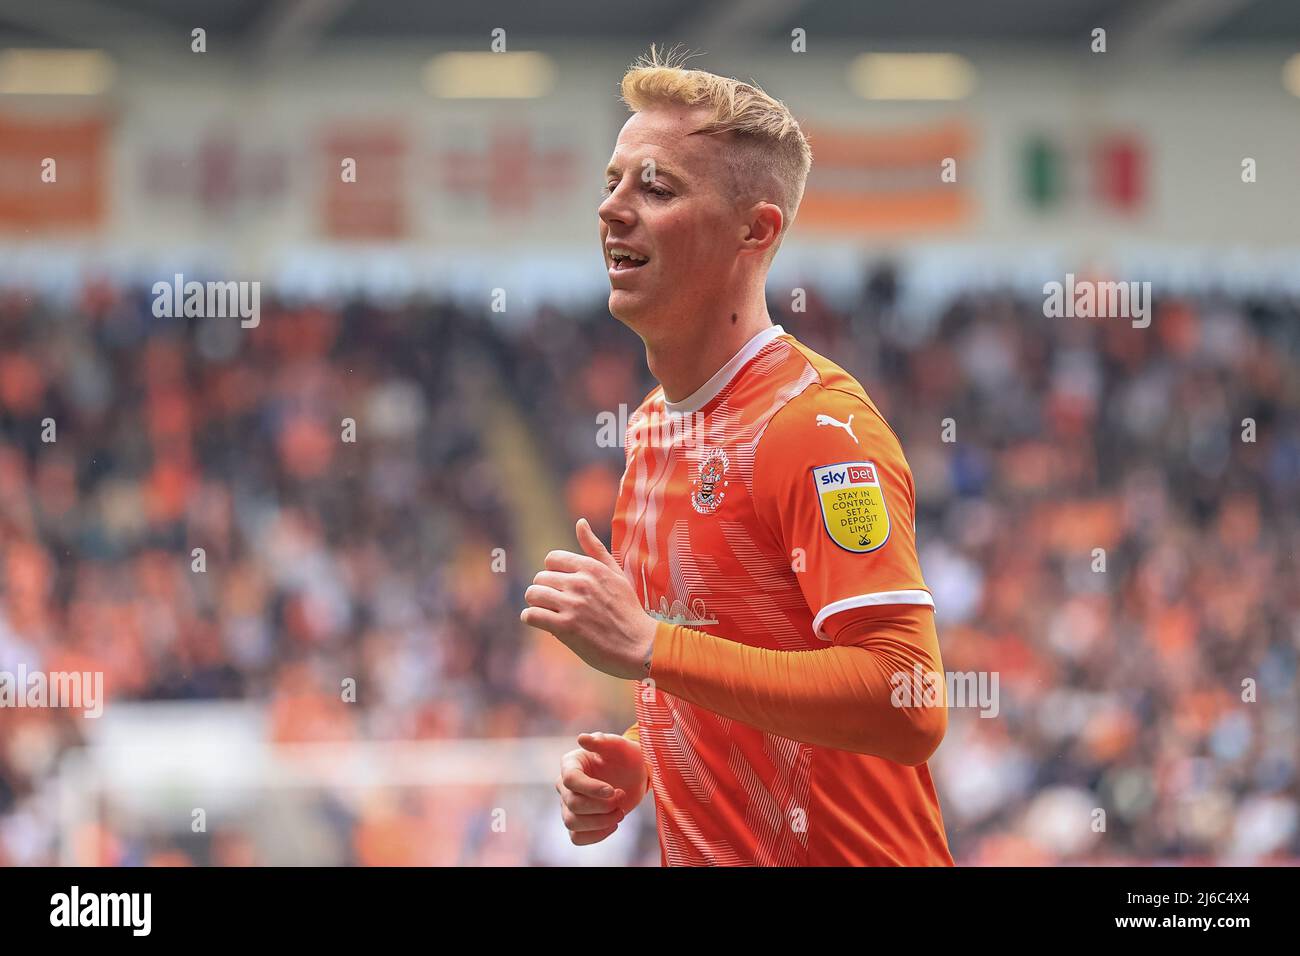 Charlie Kirk #27 of Blackpool during the game  in Blackpool, United Kingdom on 4/30/2022. (Photo by Mark Cosgrove/News Images/Sipa USA) Stock Photo